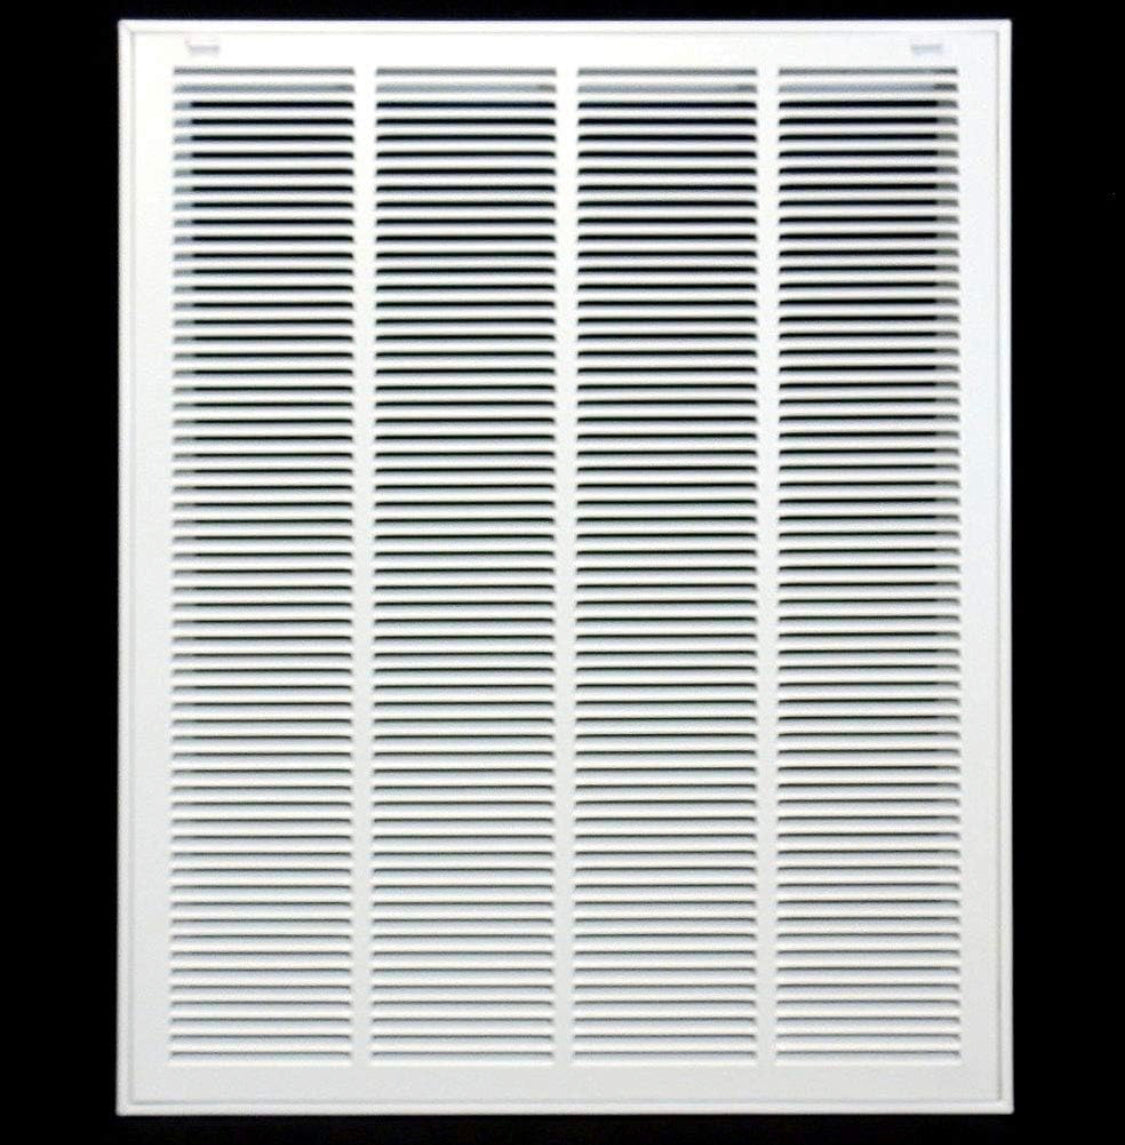 20" X 30" Steel Return Air Filter Grille for 1" Filter - Easy Plastic Tabs for Removable Face/Door - HVAC DUCT COVER - Flat Stamped Face -White